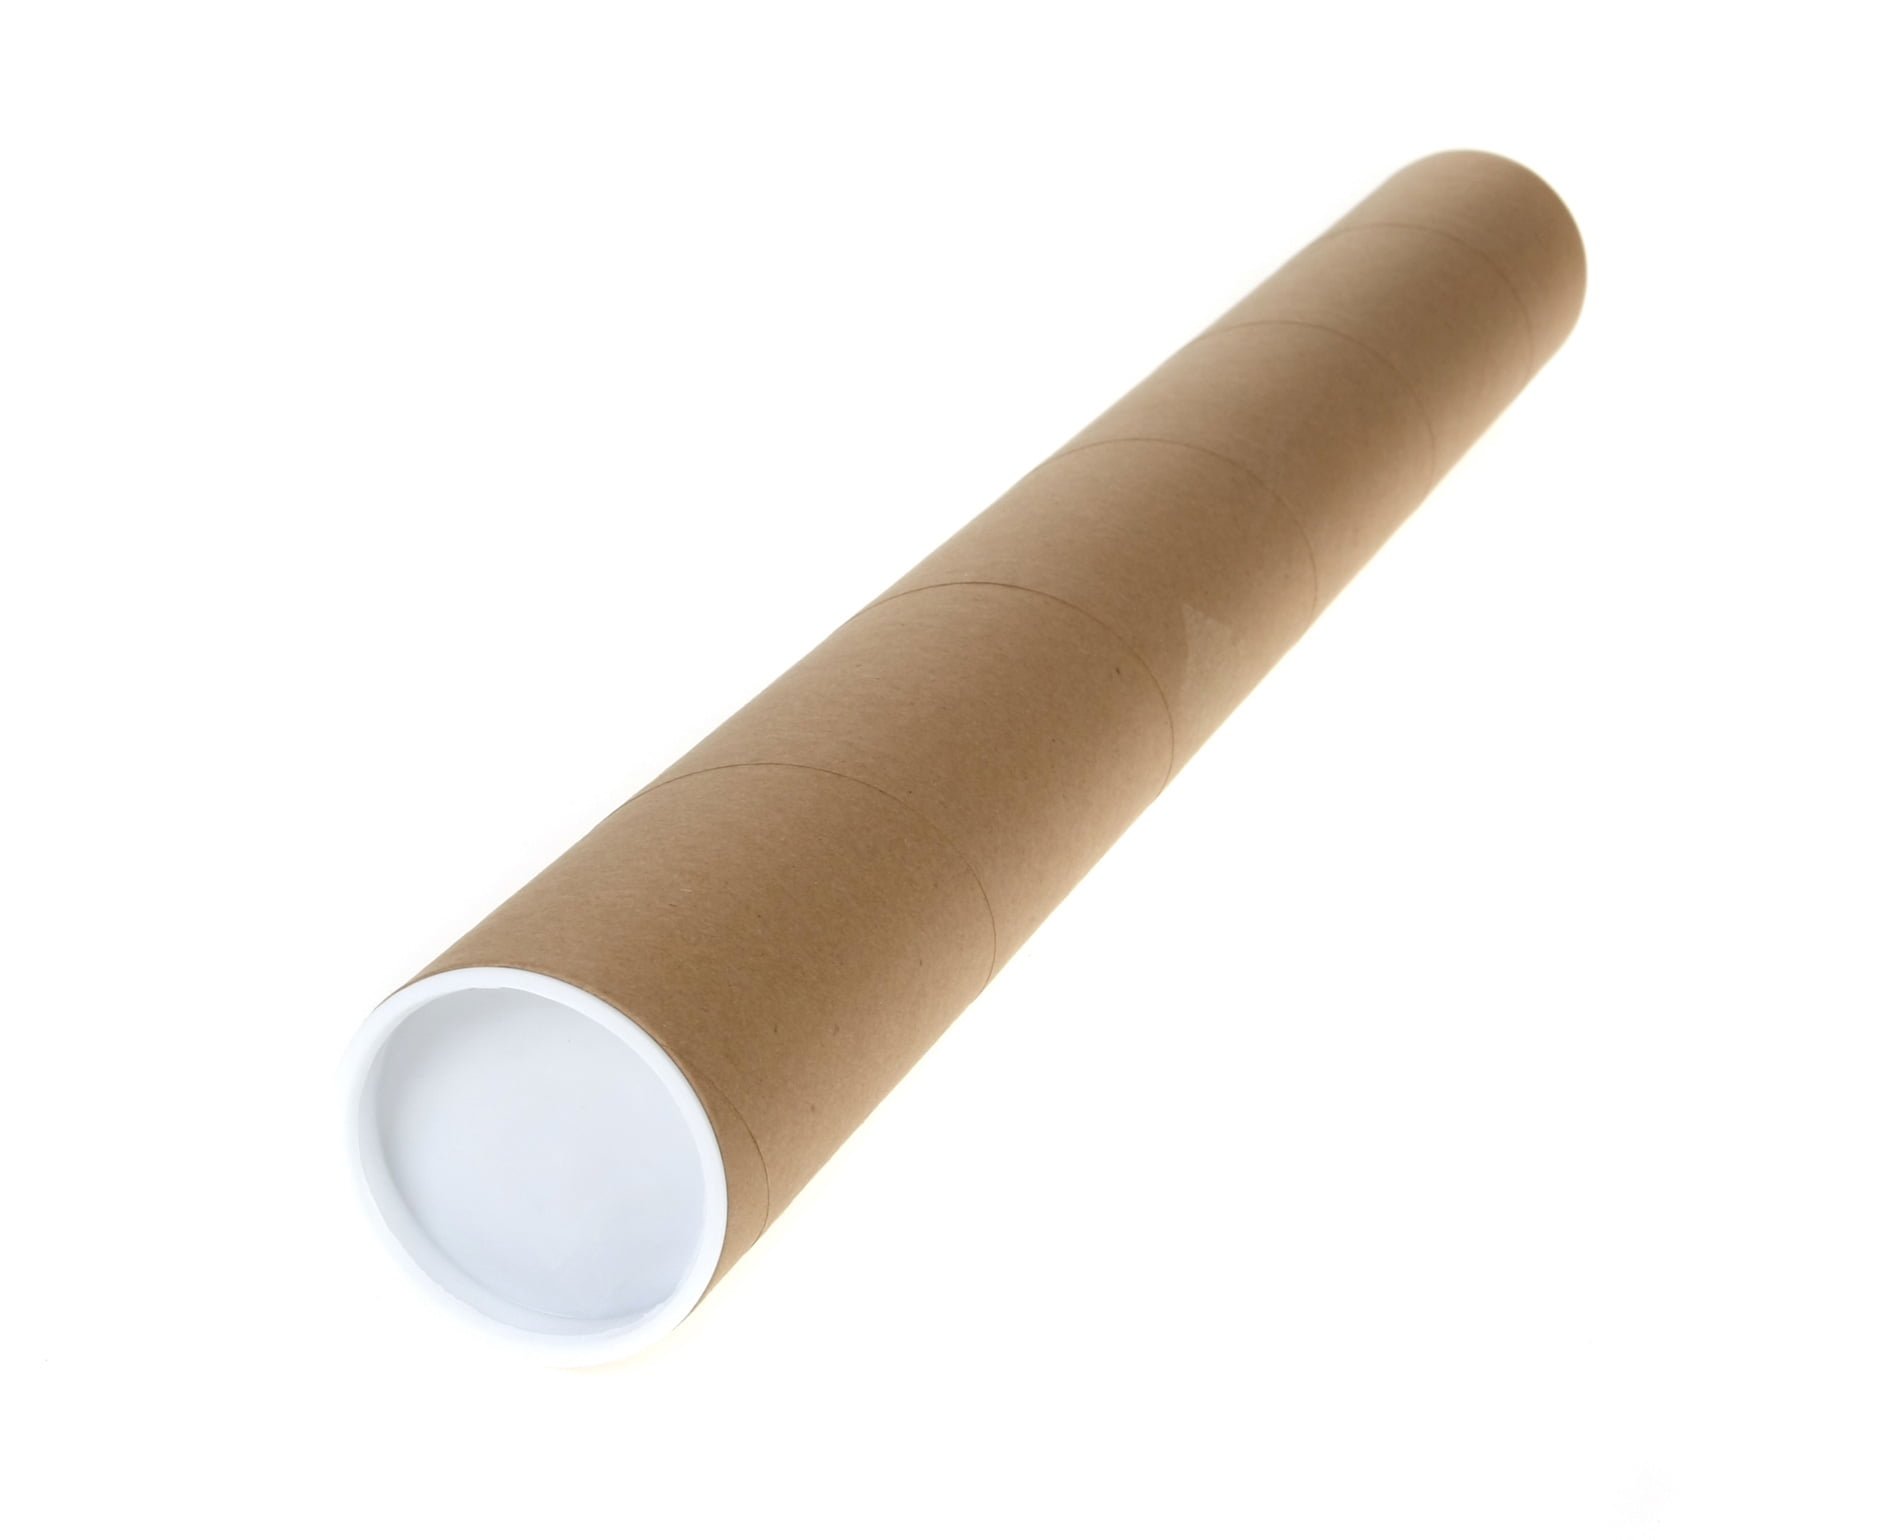 Tubeequeen Kraft Mailing Tubes with End Caps - Art Shipping Tubes 1.5-inch  D x 36-inch L, 12 Pack